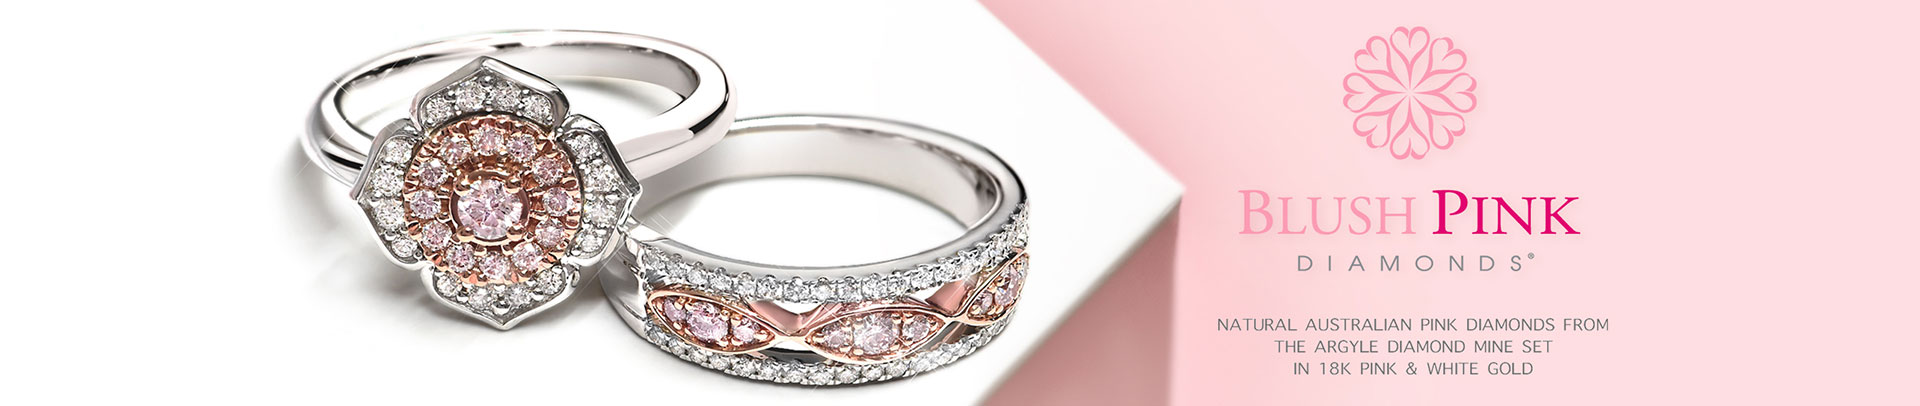 Pink Diamond Jewellery | Type: Rings | Material: White Gold